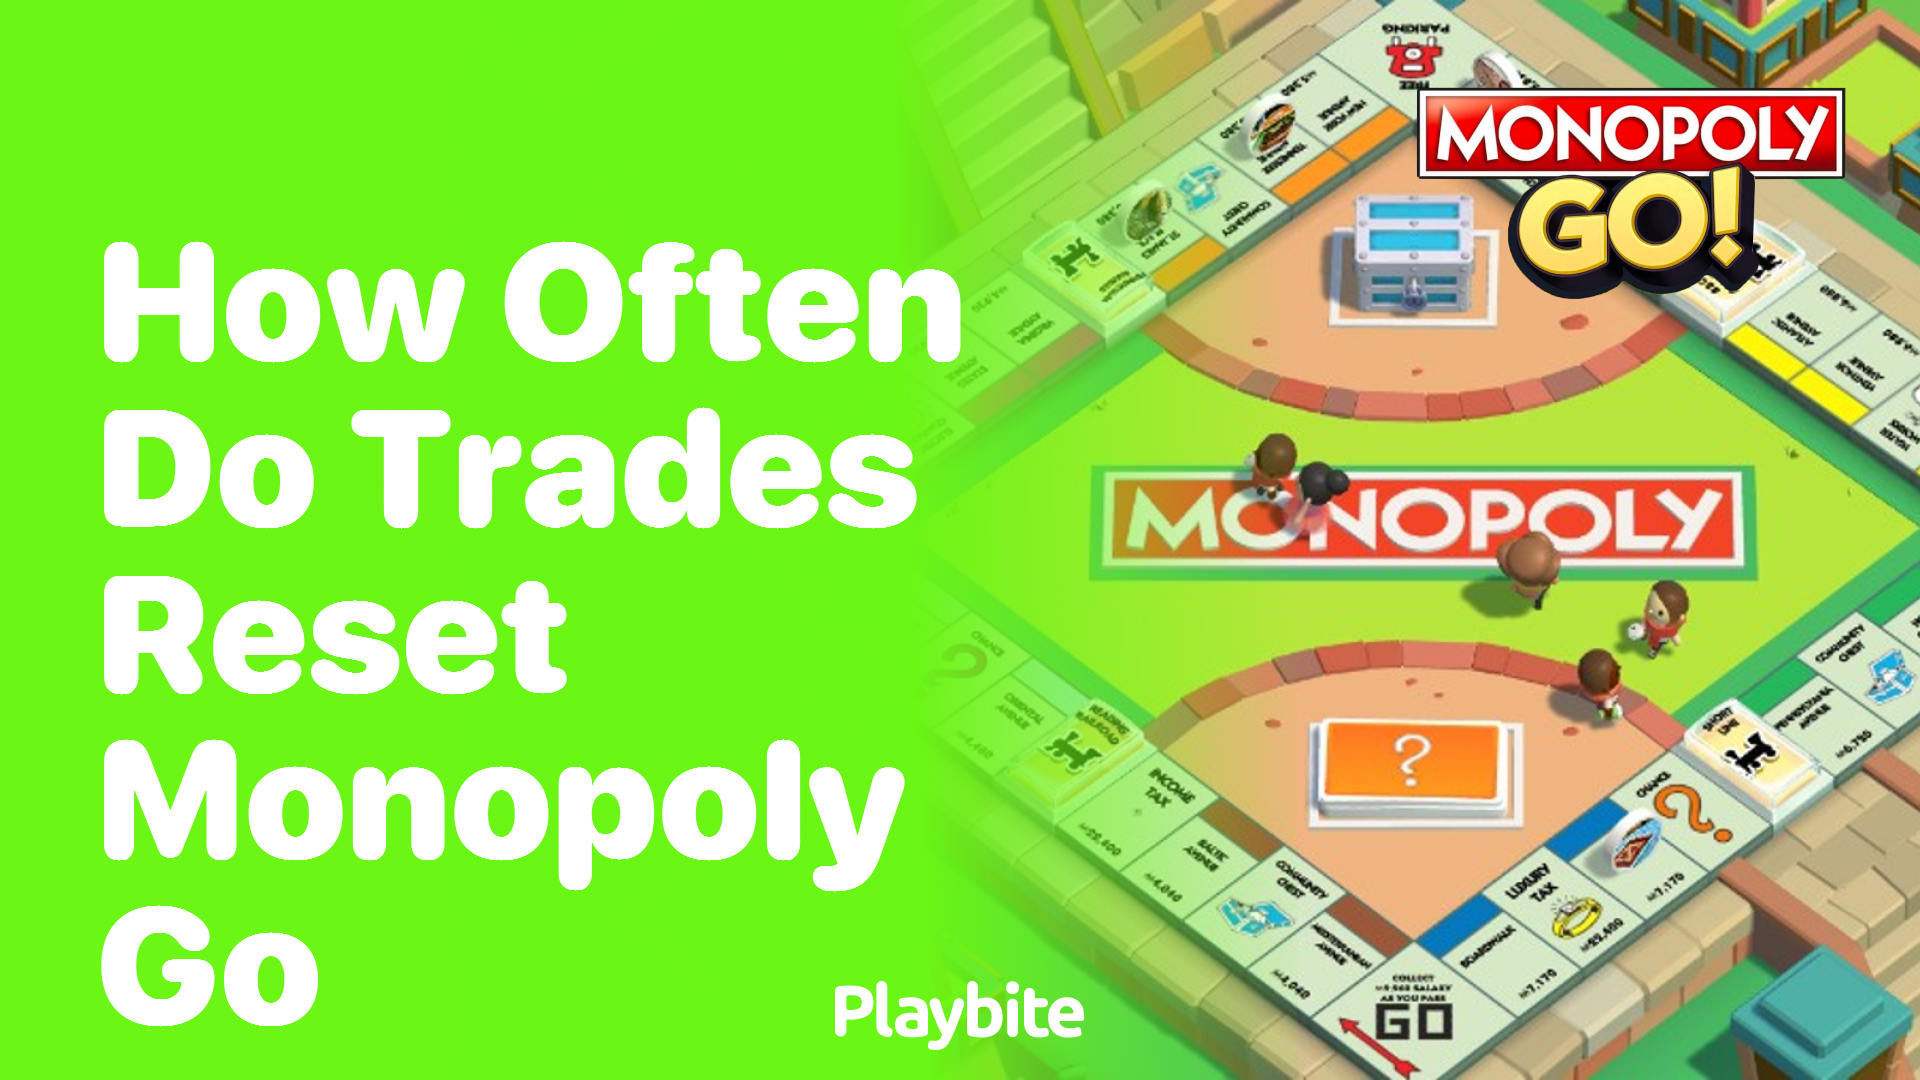 How Often Do Trades Reset in Monopoly Go?